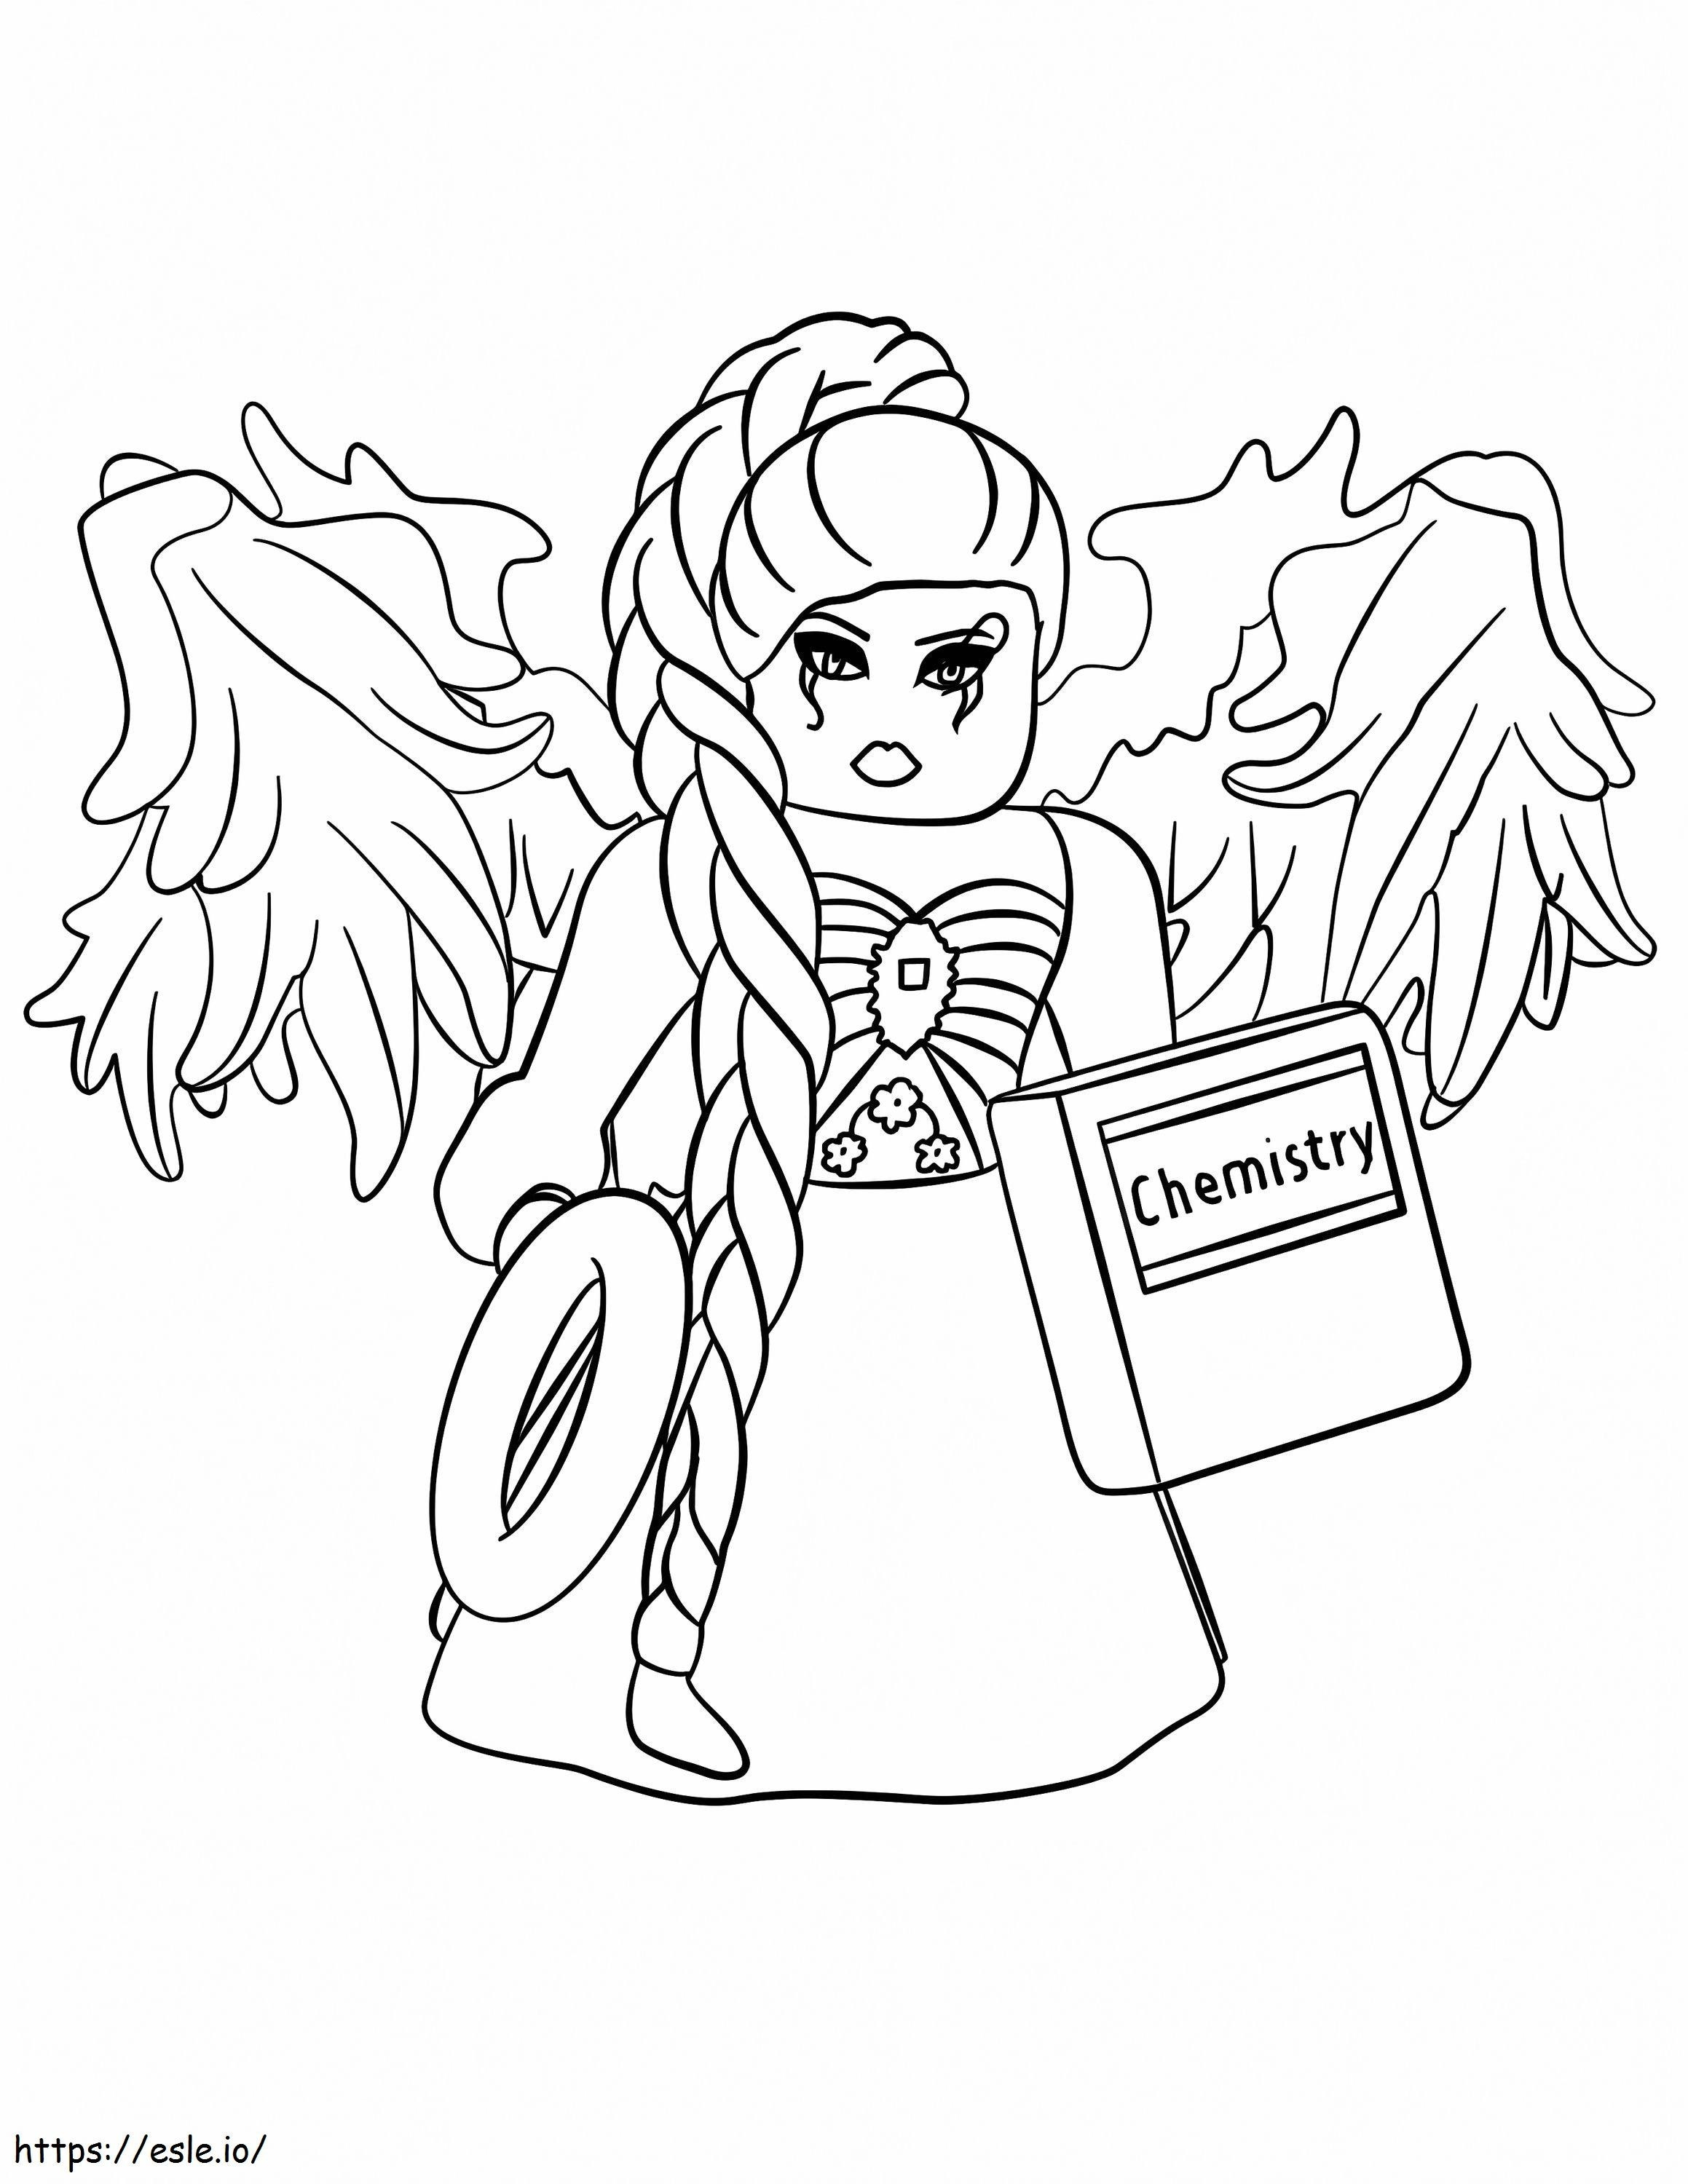 Roblox Royale High coloring page